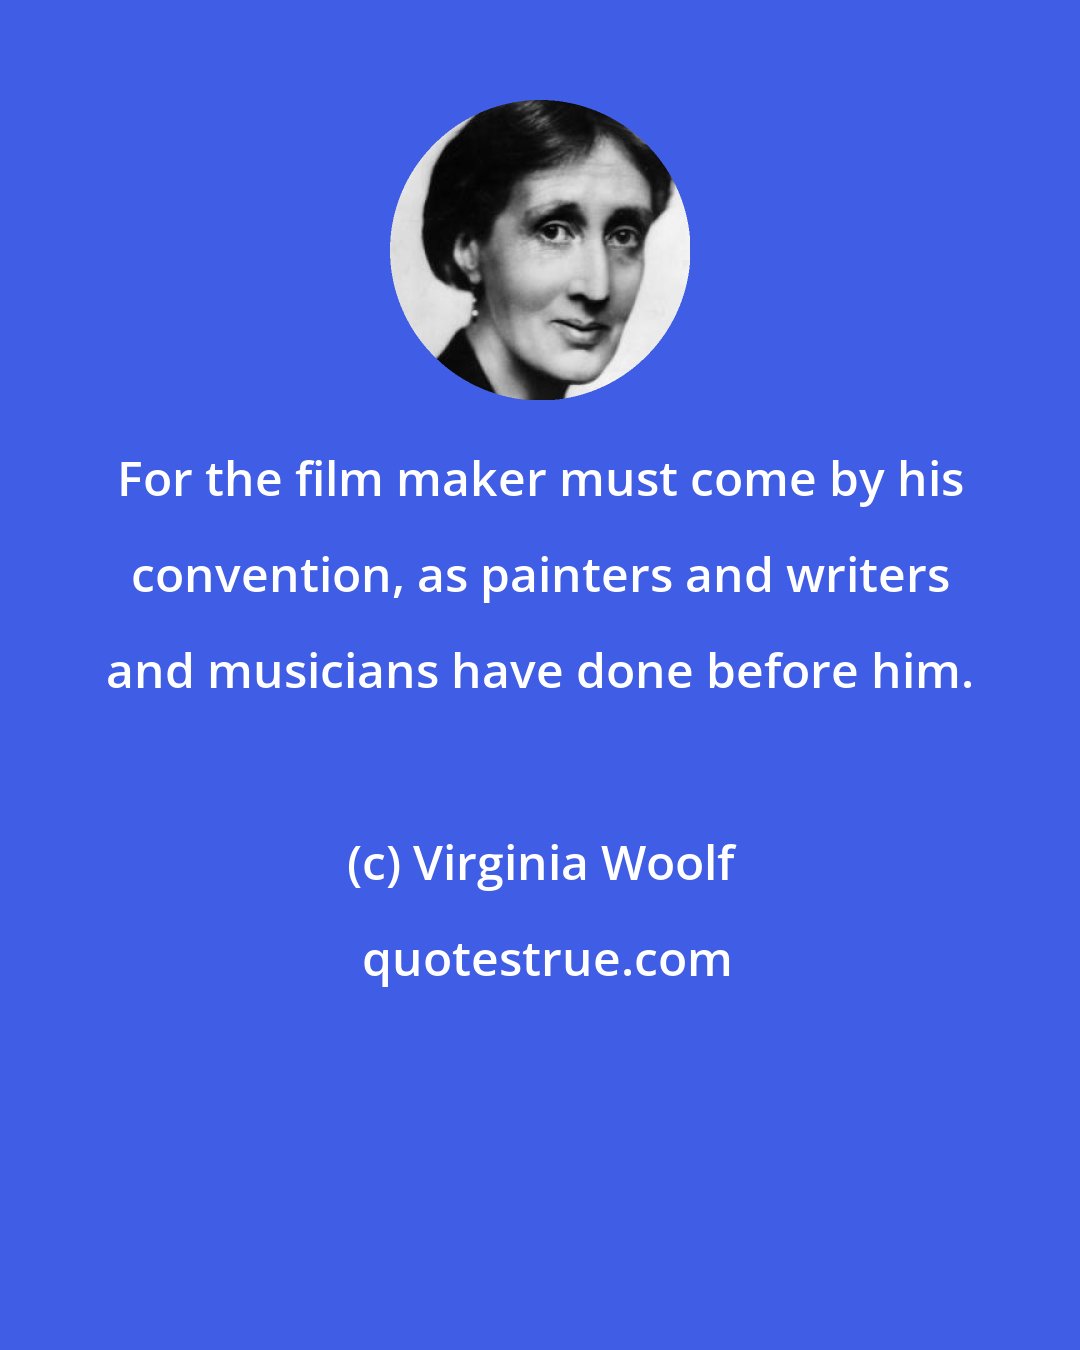 Virginia Woolf: For the film maker must come by his convention, as painters and writers and musicians have done before him.